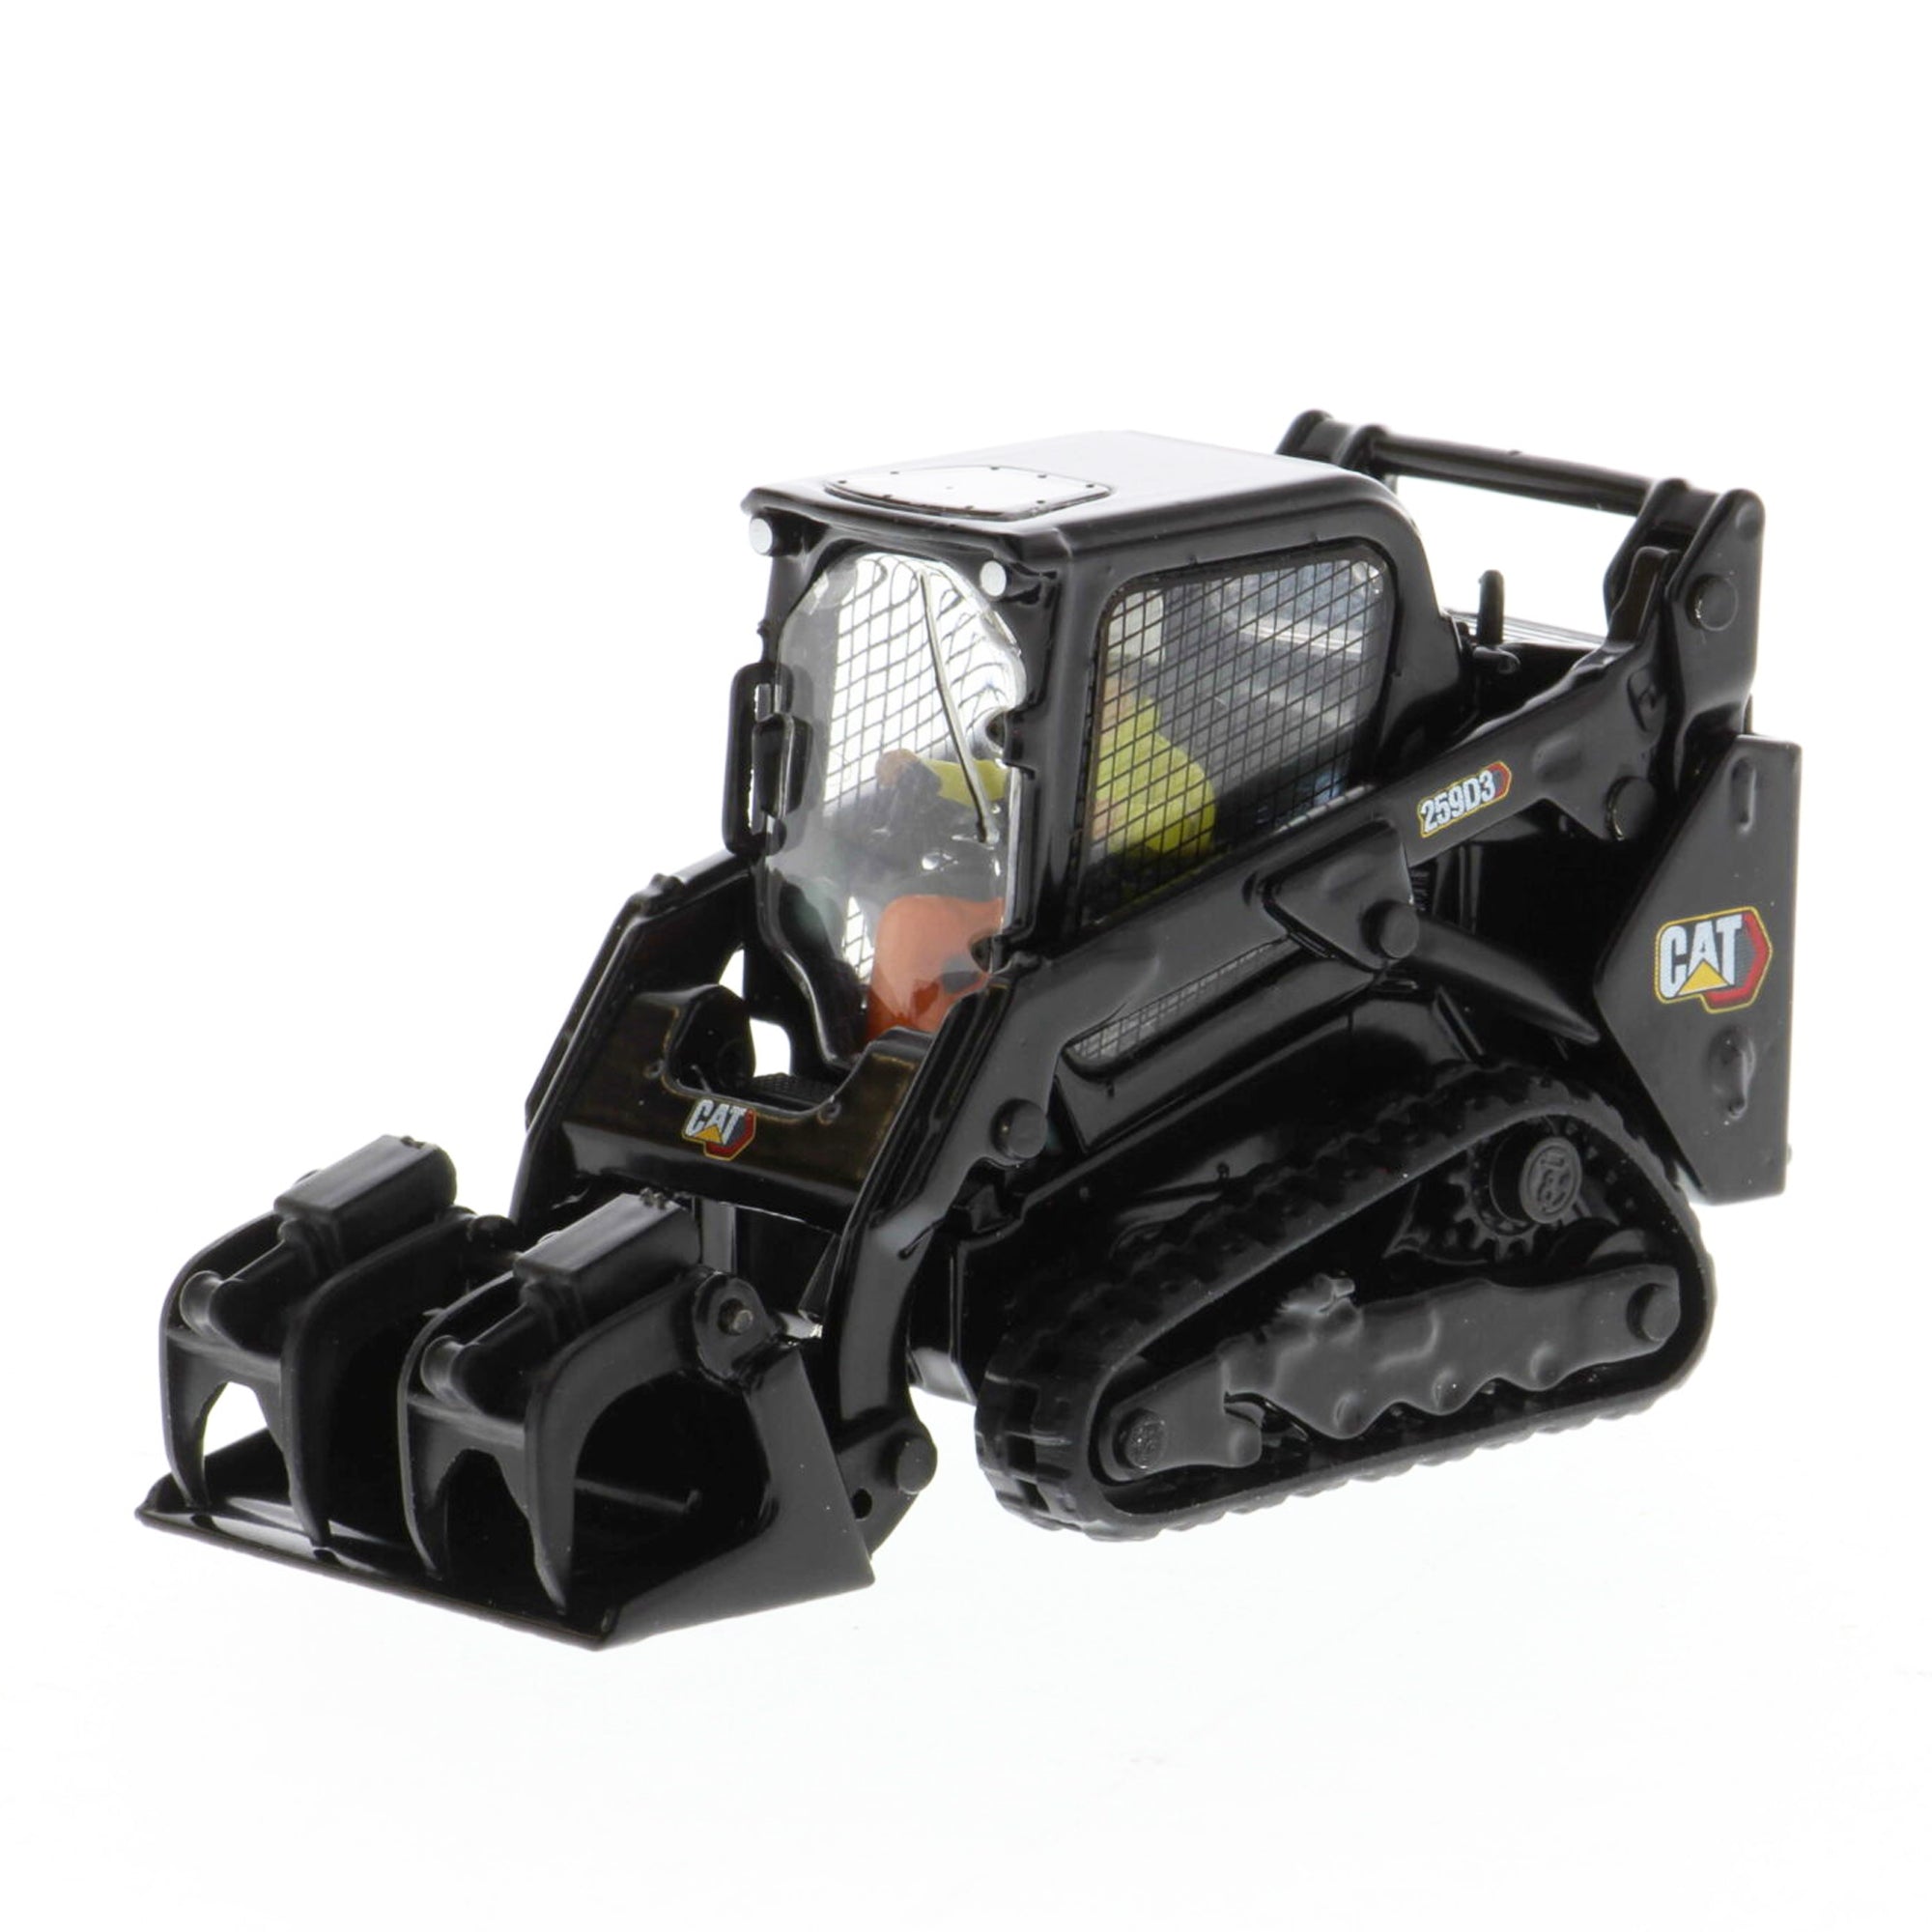 CAT Die Cast 259D3 Compact Track Loader Special Black Finish 1:50